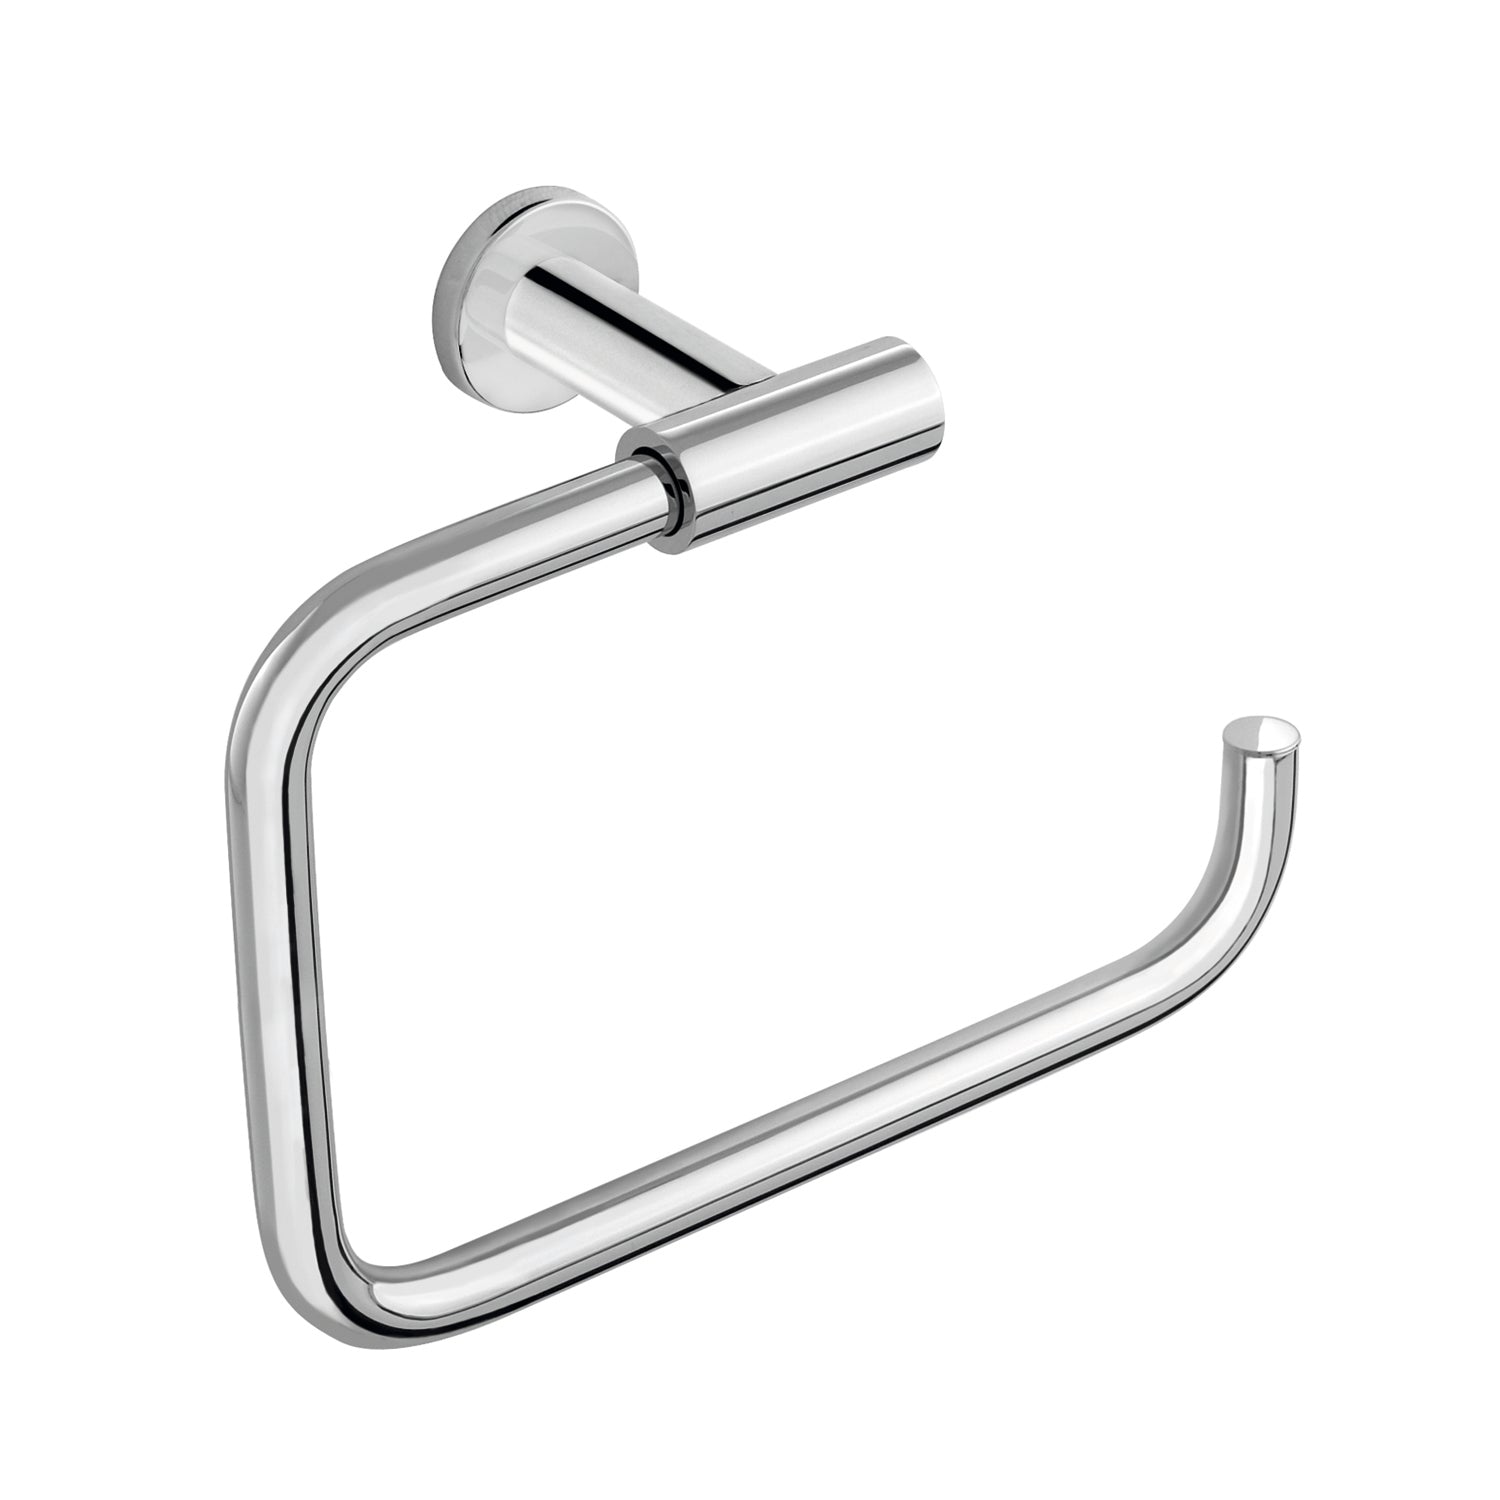 COSMIC Architect Towel Ring, Wall Mount, Brass Body, Chrome Finish, 8-7/8 x 6-5/16 x 3-3/8 Inches (2050172)